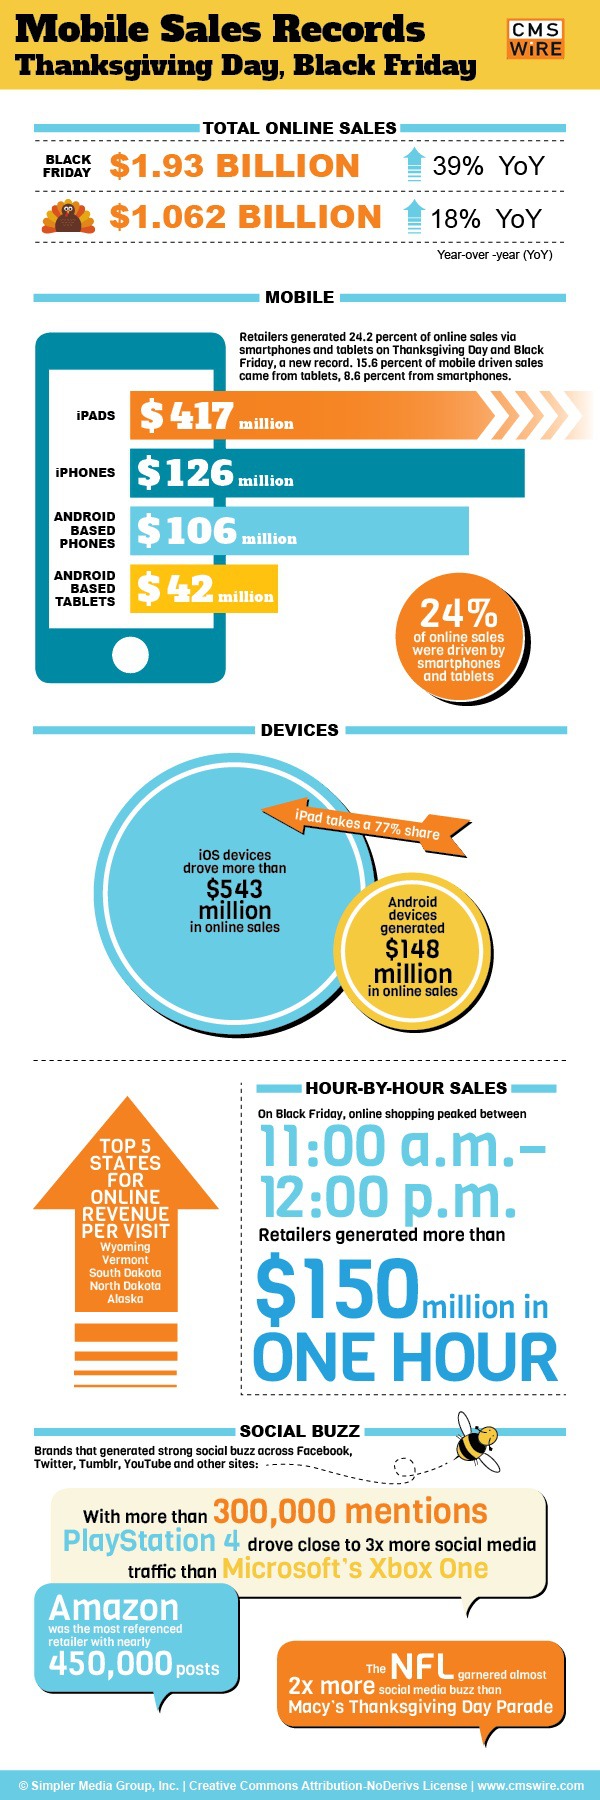 mobile sales records on thanksgiving day and black friday 2013